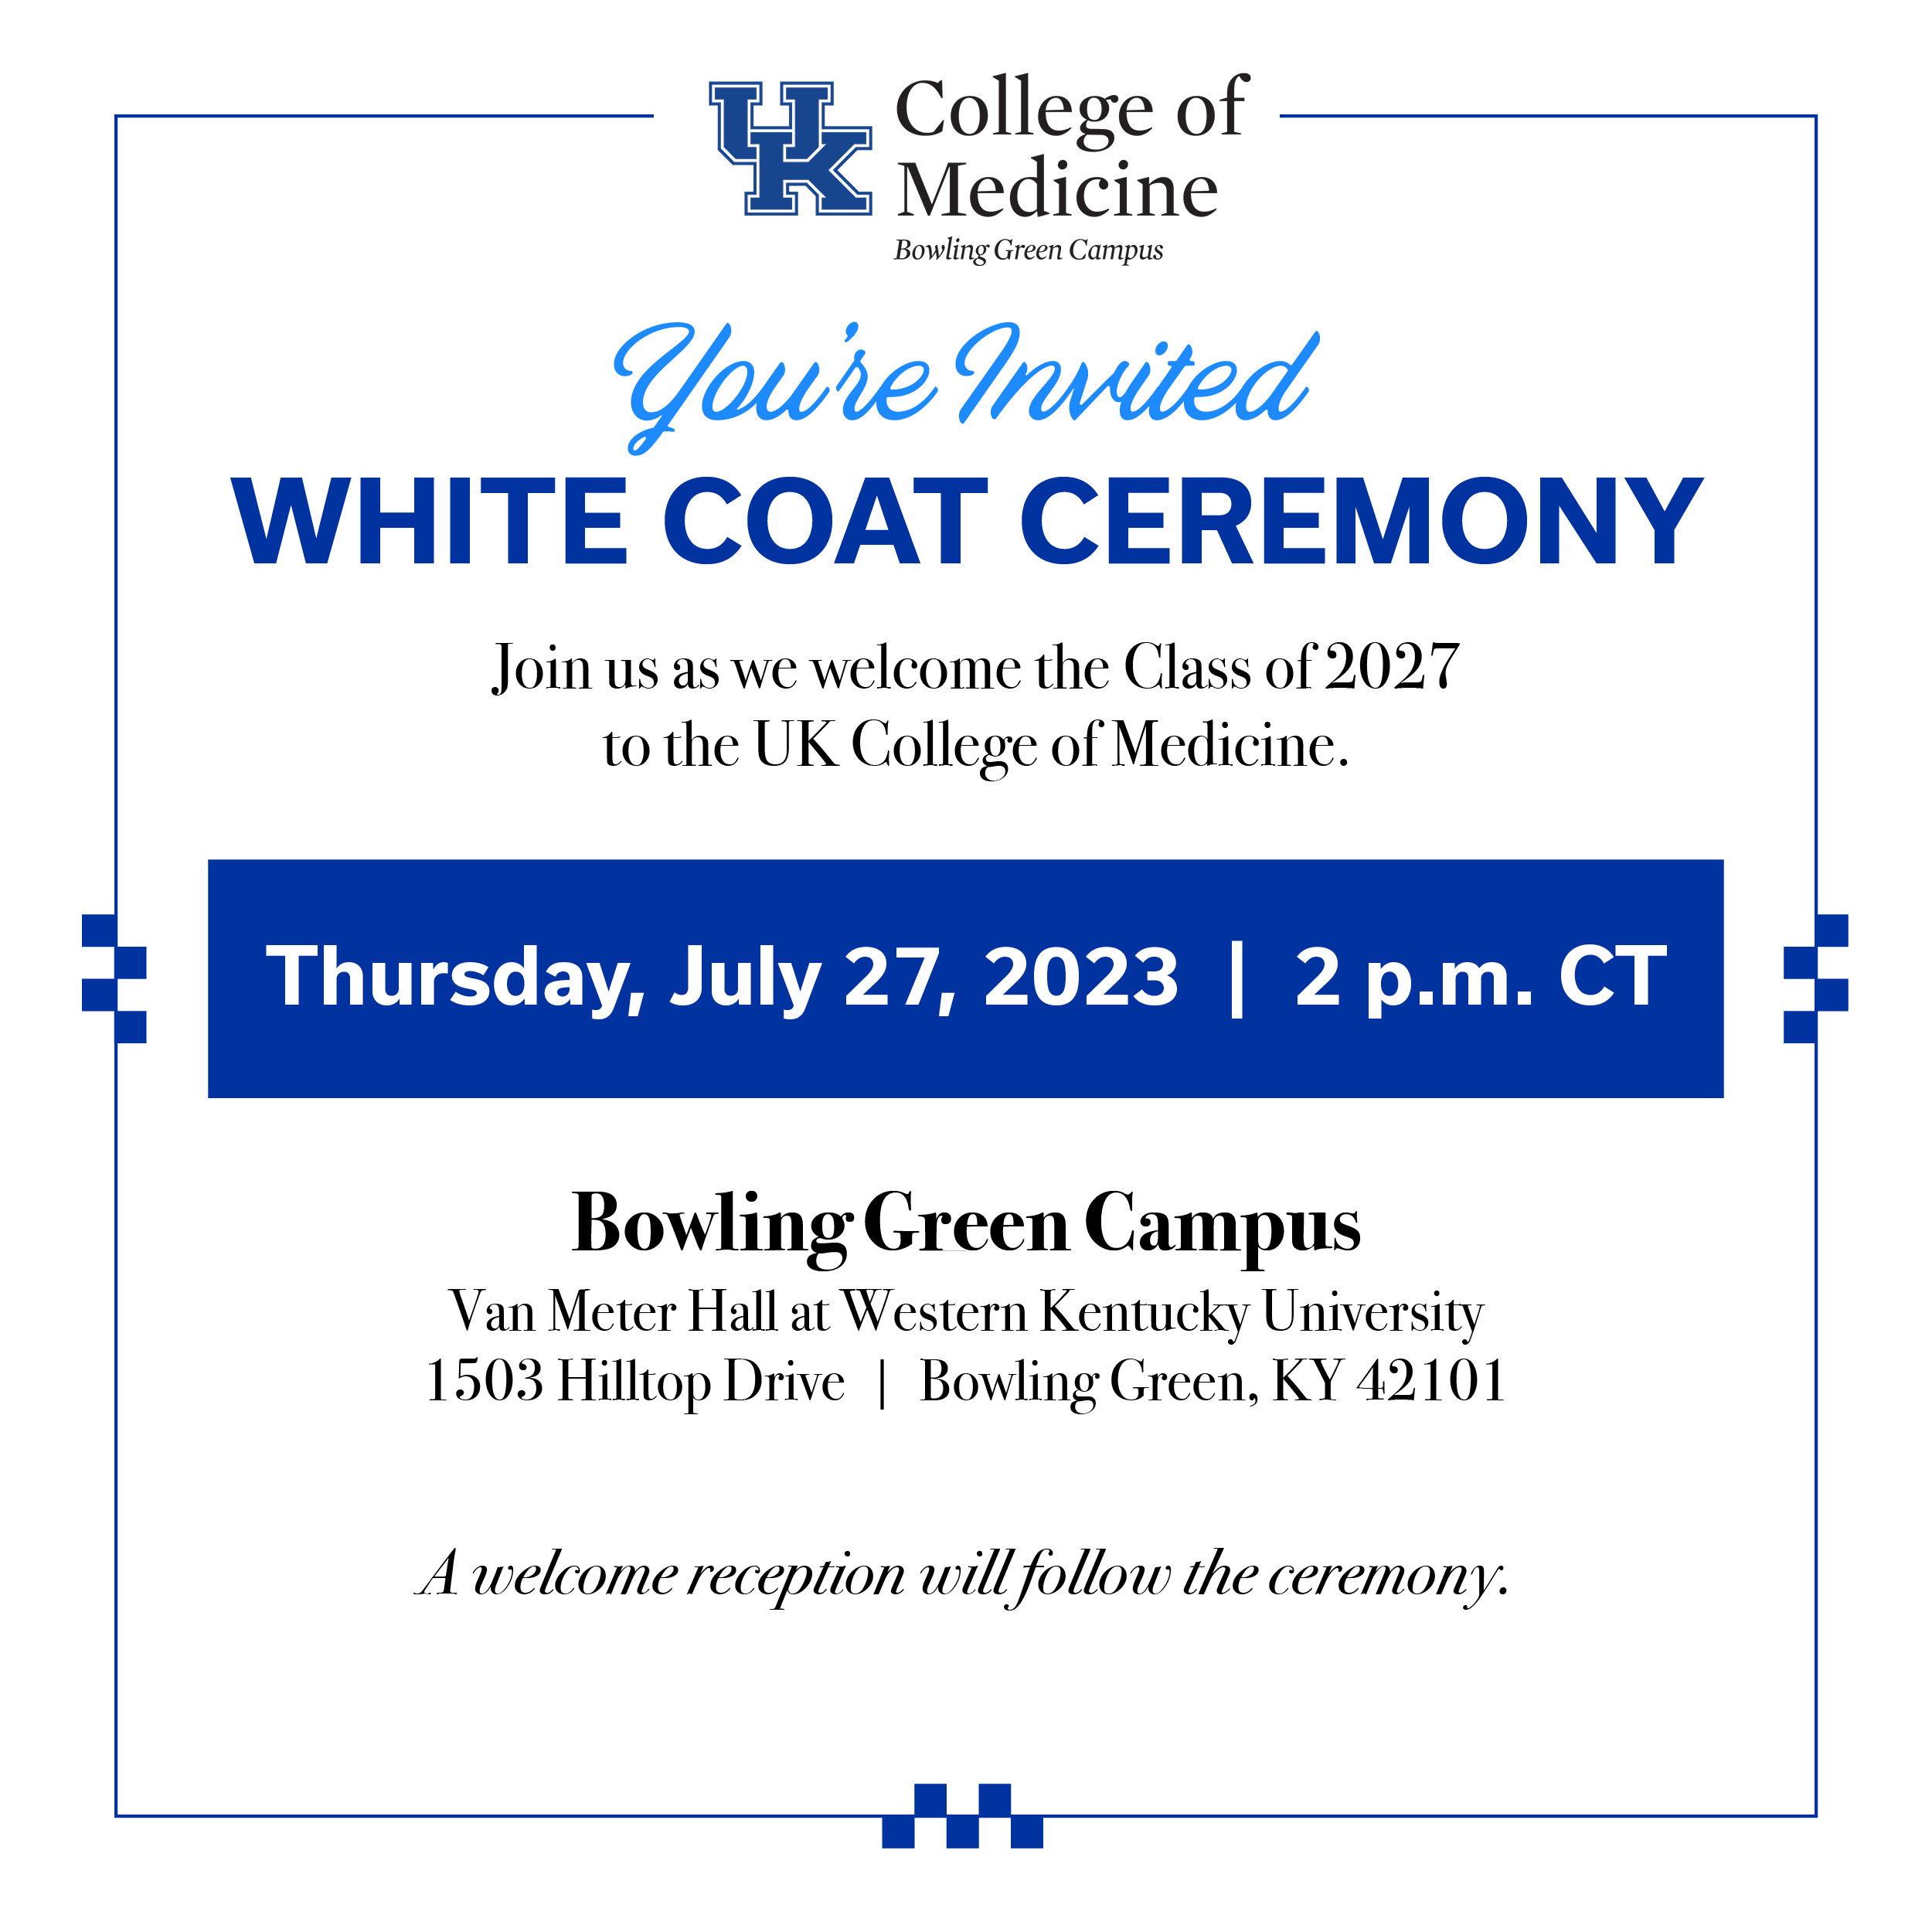 white coat ceremony invite for bowling green campus